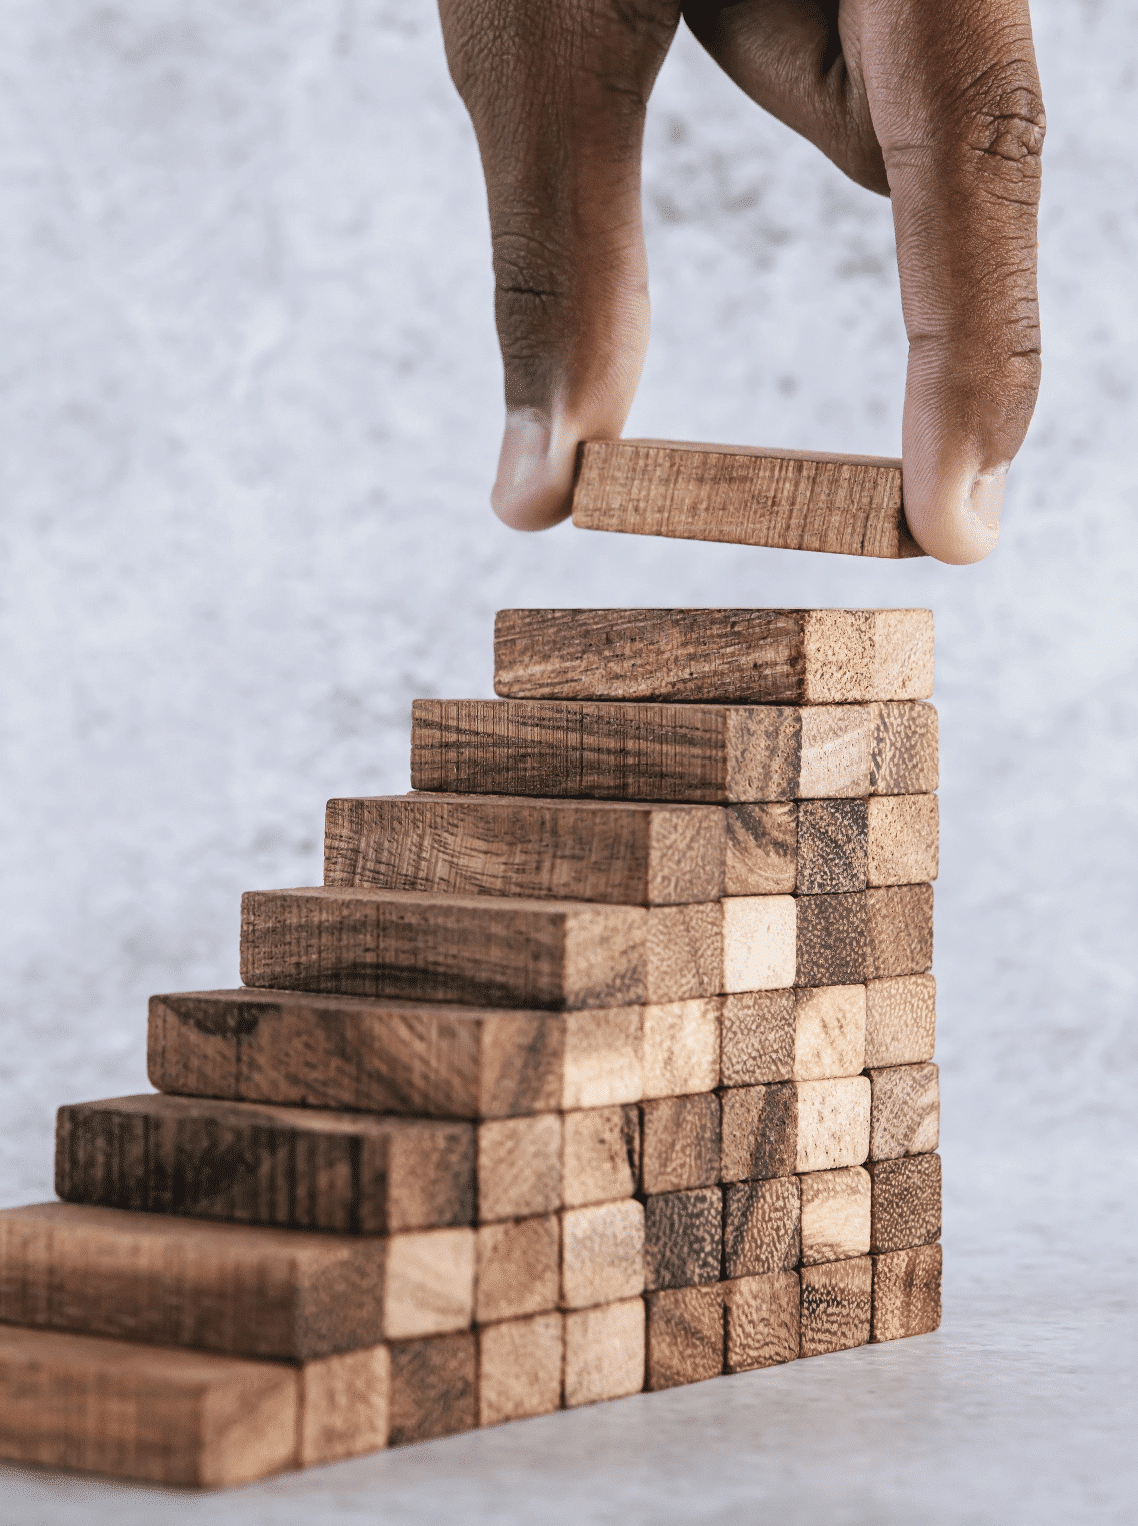 stacking-wooden-blocks-is-risk-creating-business-growth-ideas@2x